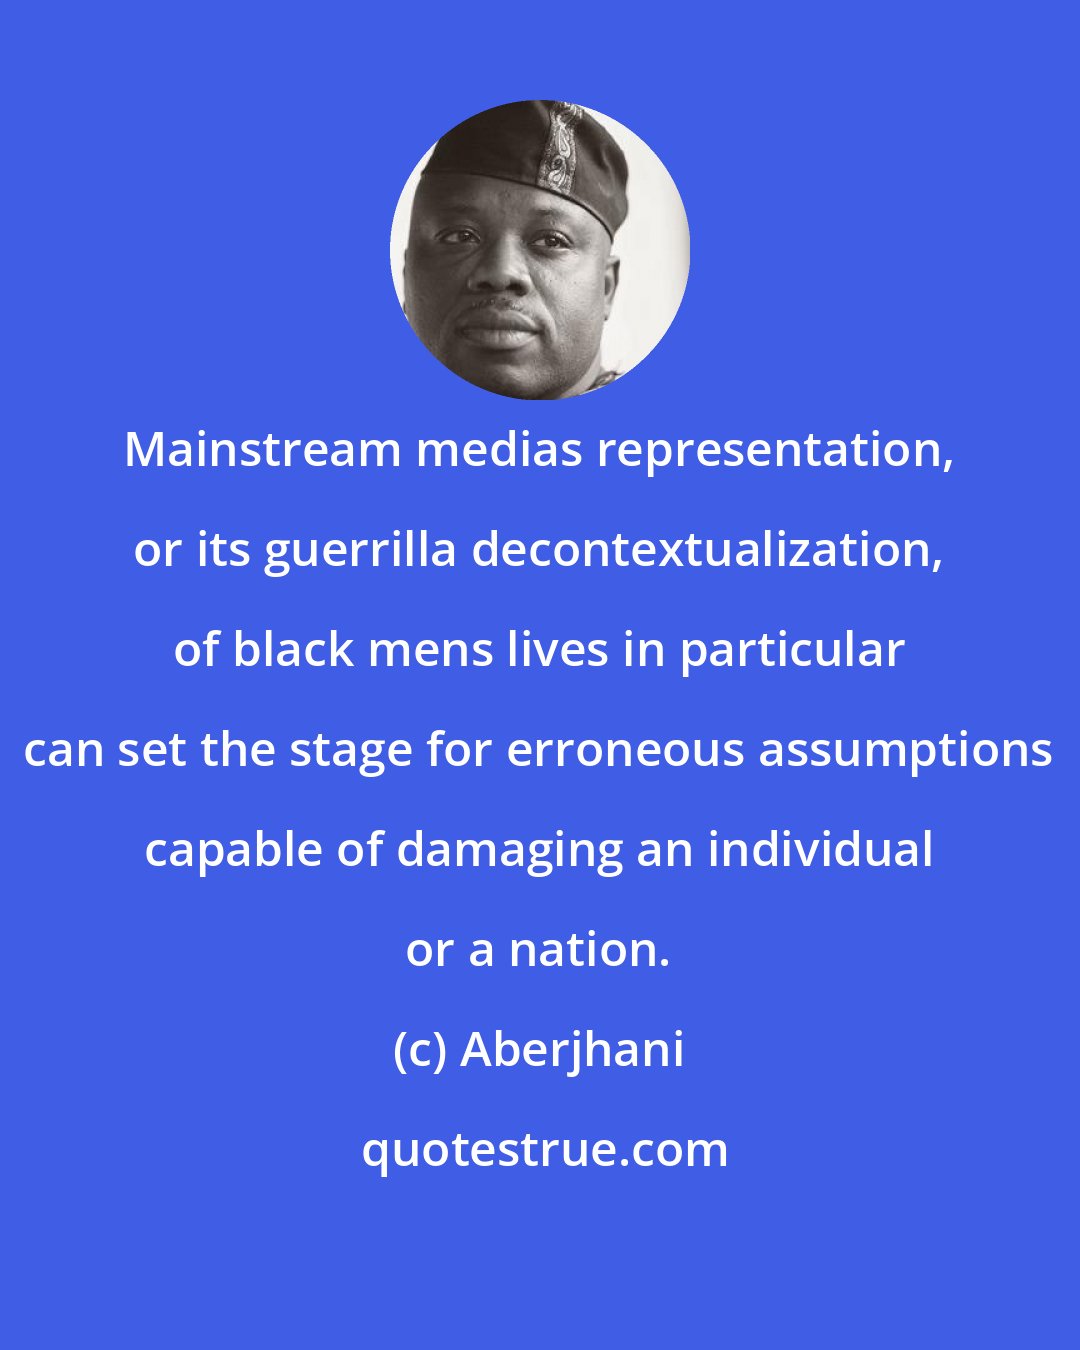 Aberjhani: Mainstream medias representation, or its guerrilla decontextualization, of black mens lives in particular can set the stage for erroneous assumptions capable of damaging an individual or a nation.